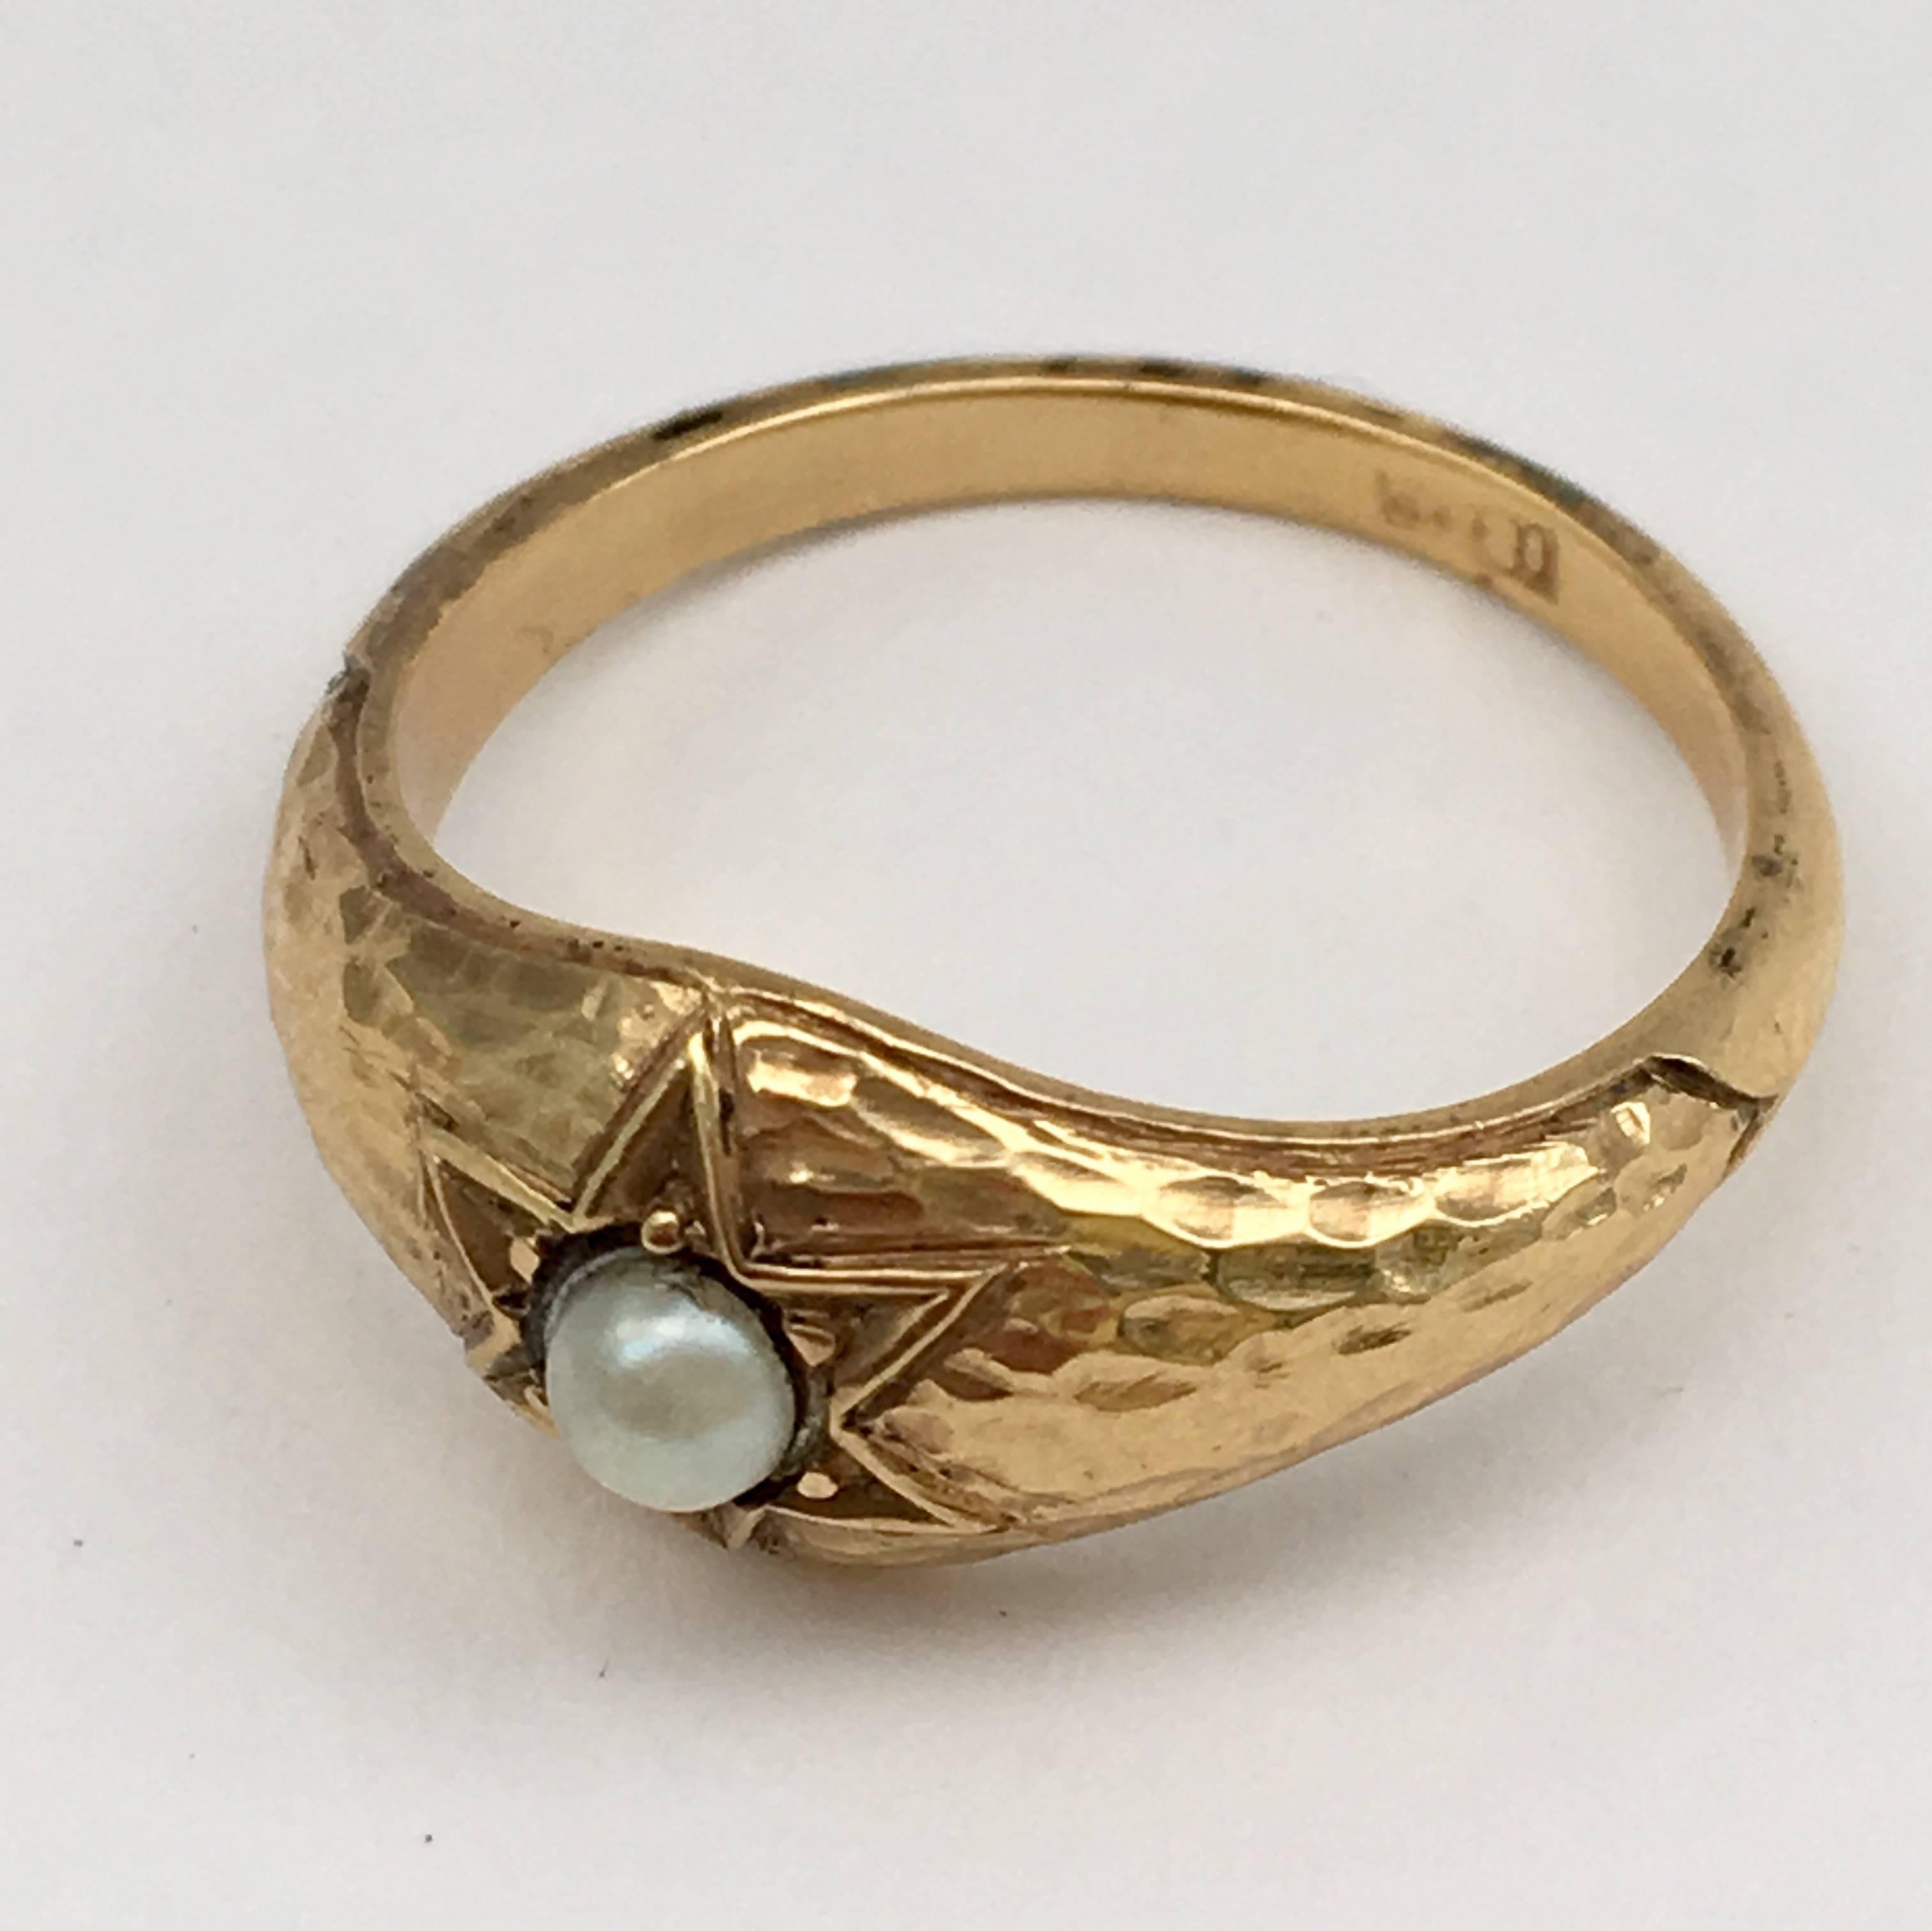 Pearl Ring Hammered Gold Antique Jewelry Vintage Star Signet Rings Celestial 3